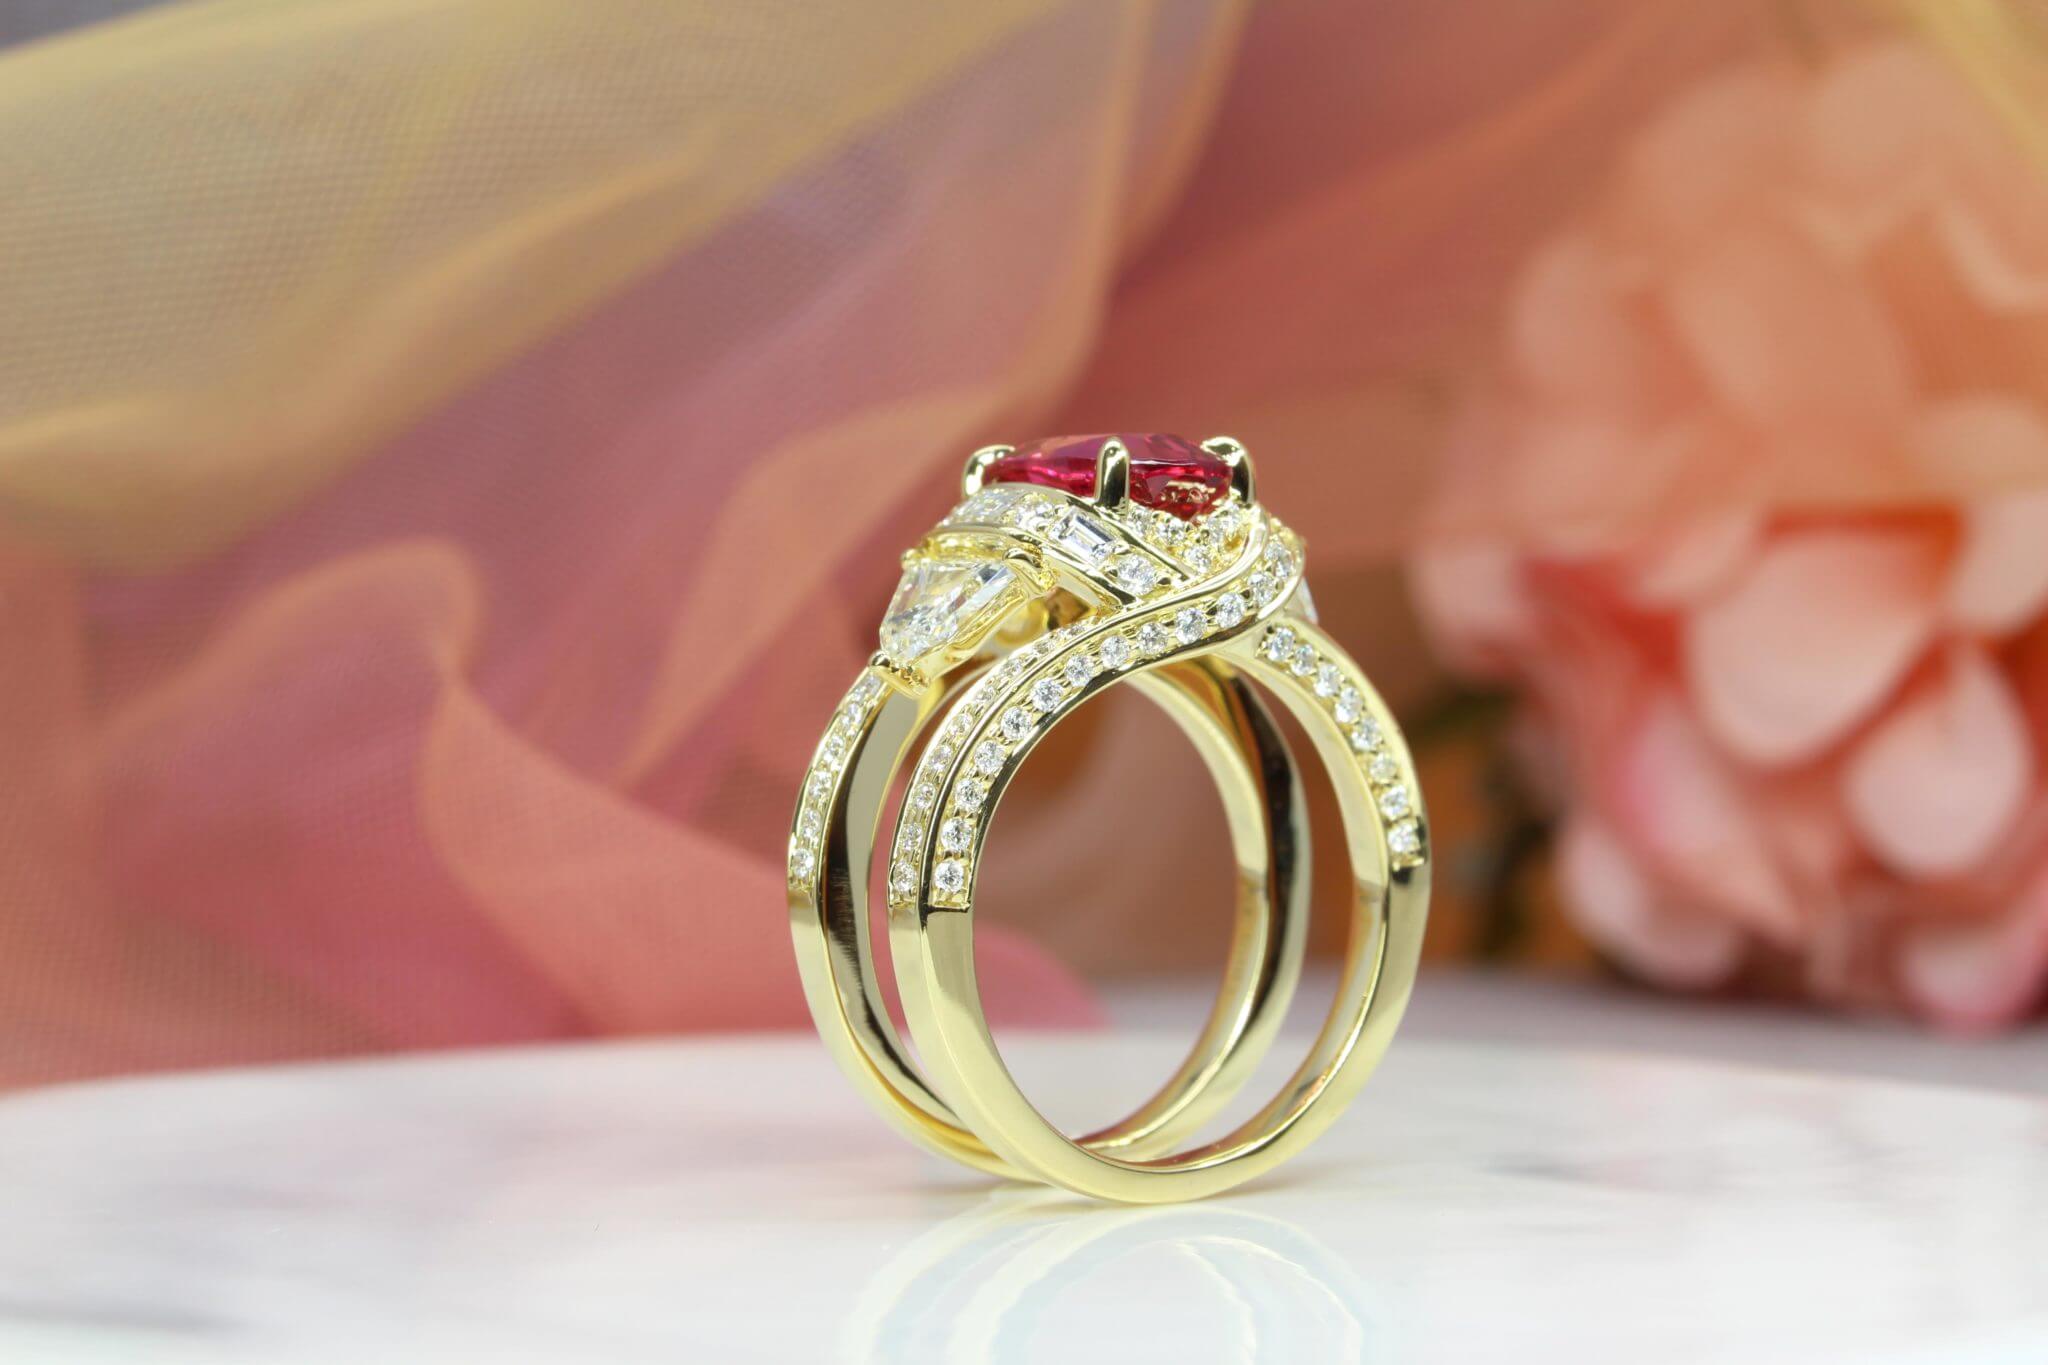 Mahenge Red Pink Spinel Gemstone customised with chevron, baguette and brilliant round diamonds. Mahenge spinel is found in Tanzania, one of the most sought after colour of spinel in the world | Local Singapore Bespoke Ring and Jewellery Designer